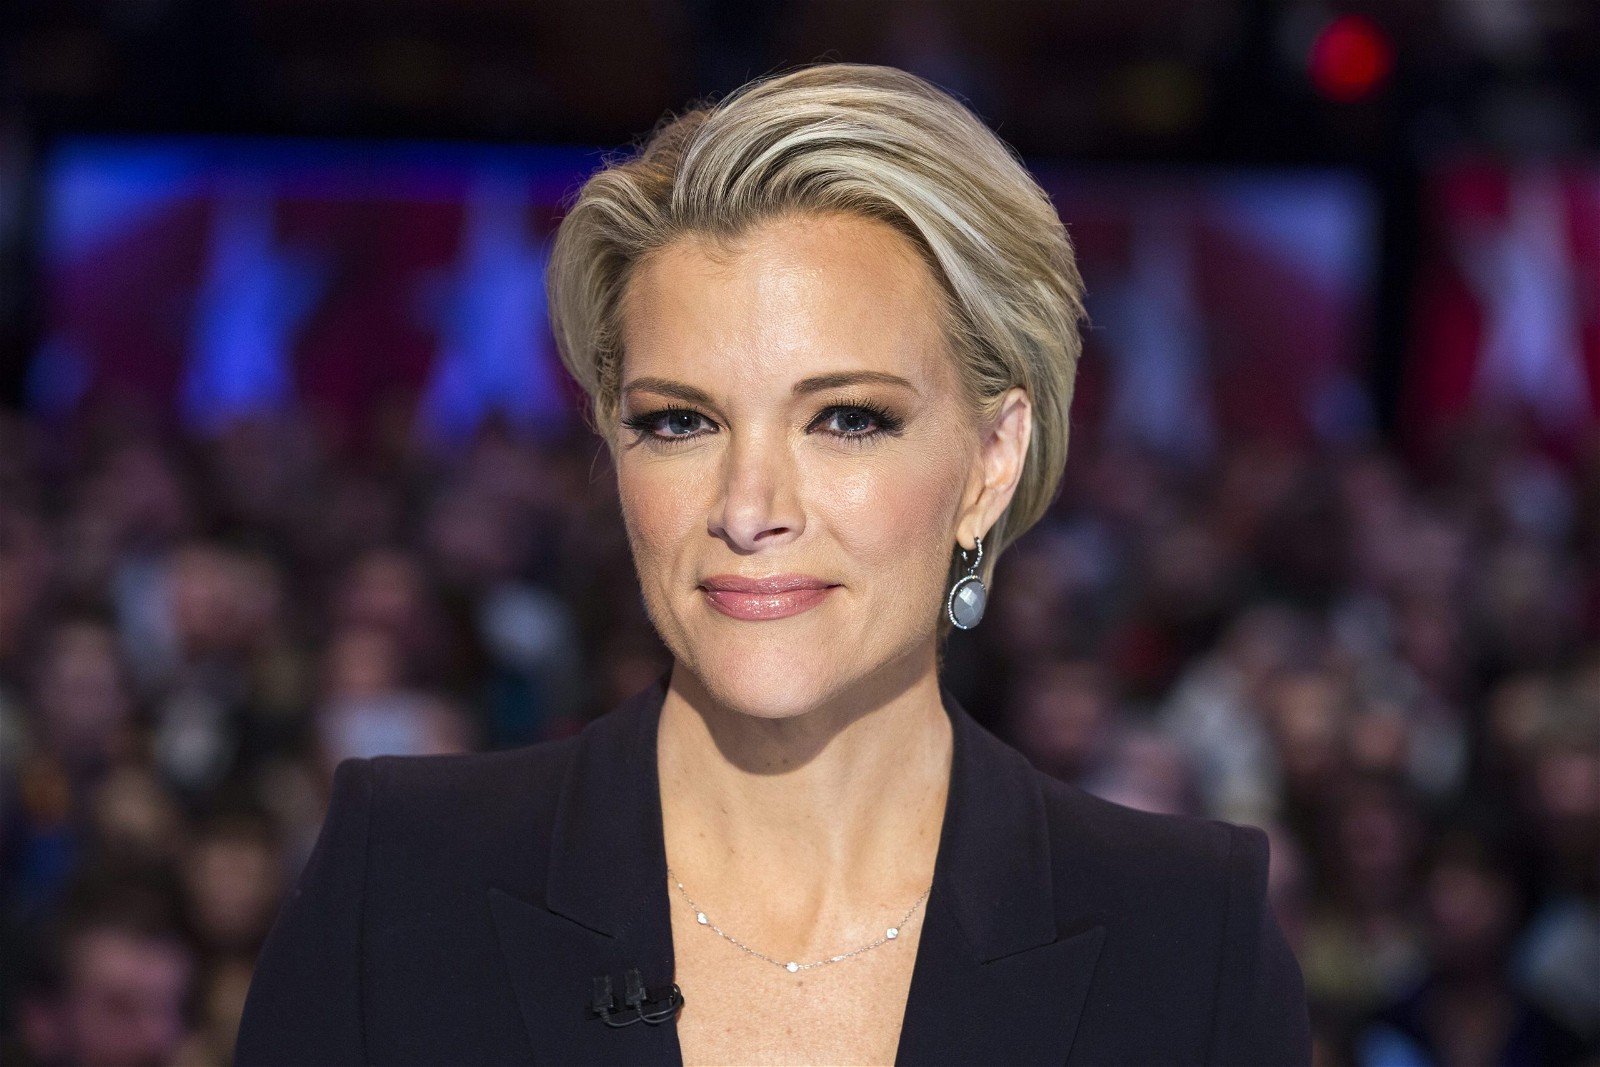 Charlize Theron played the role of Megyn Kelly